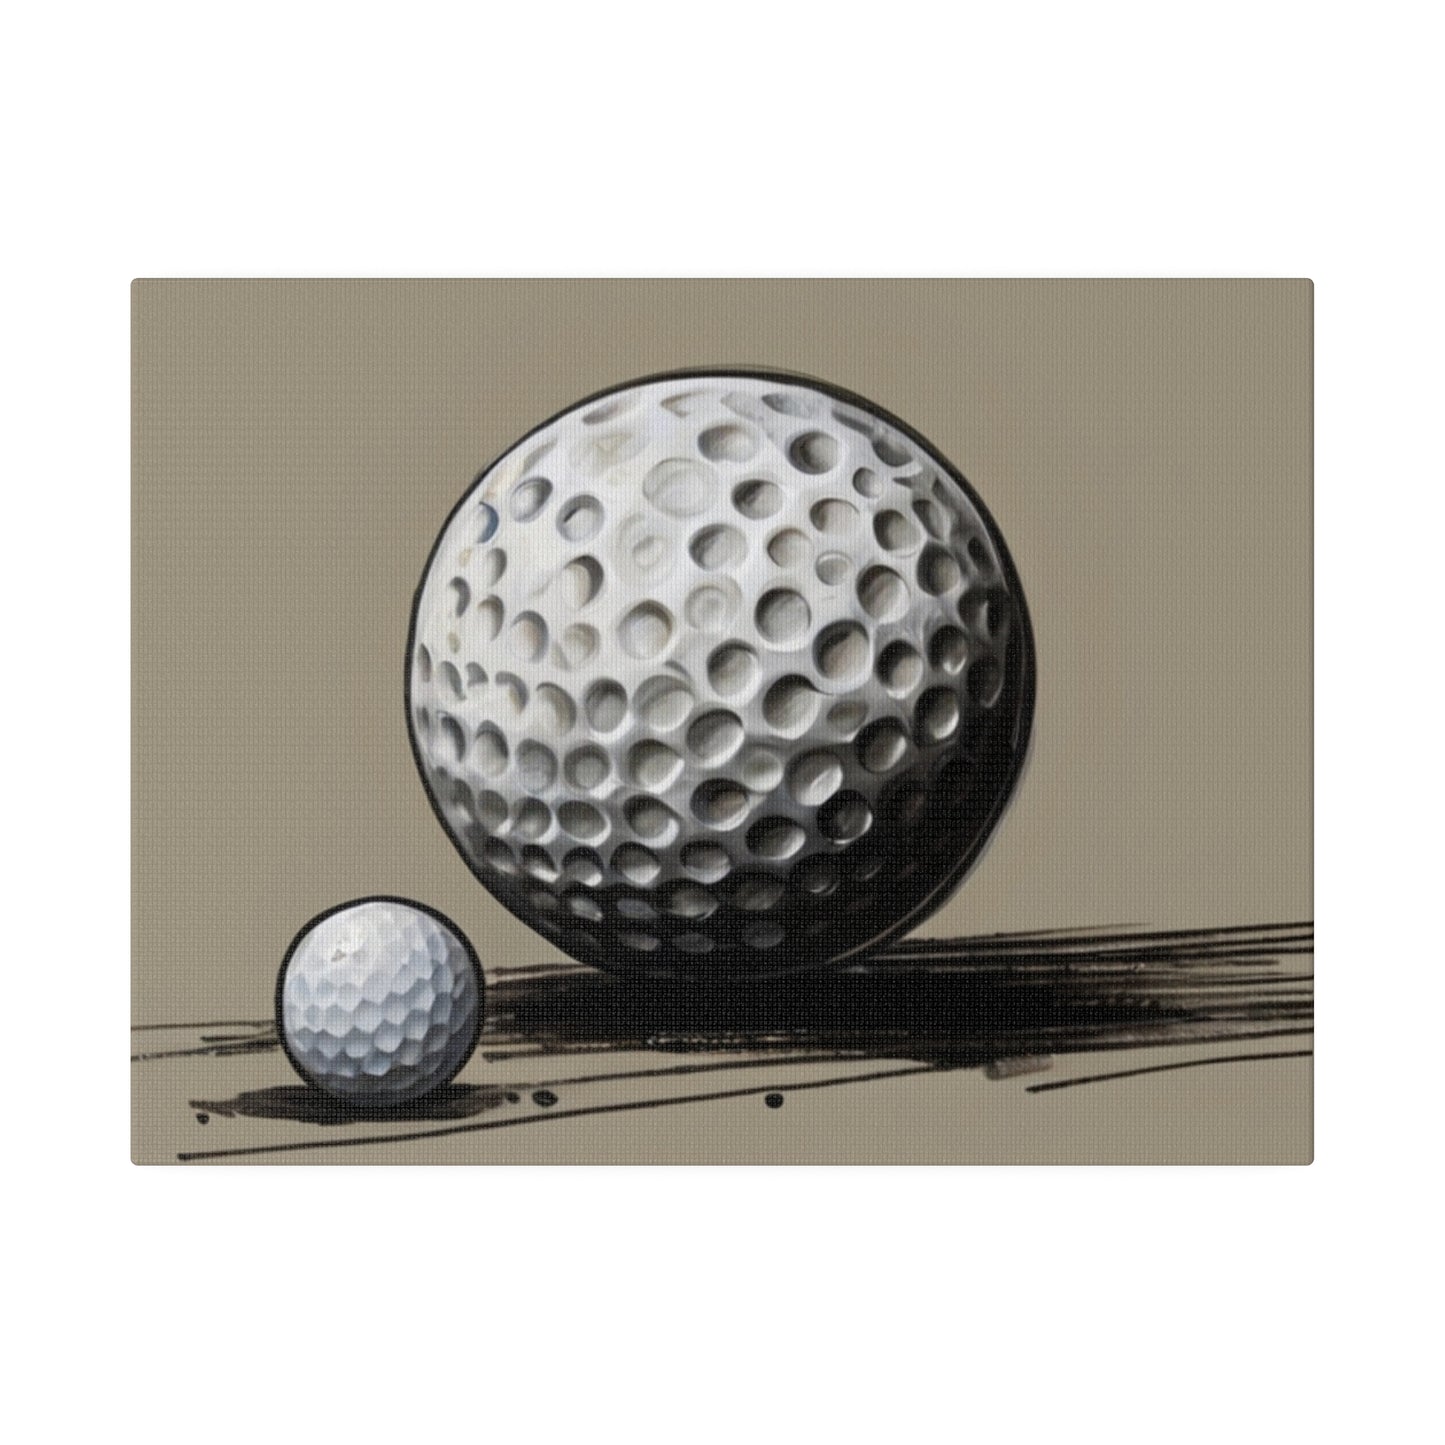 Little and Large Golf Ball - Matte Canvas, Stretched, 0.75"